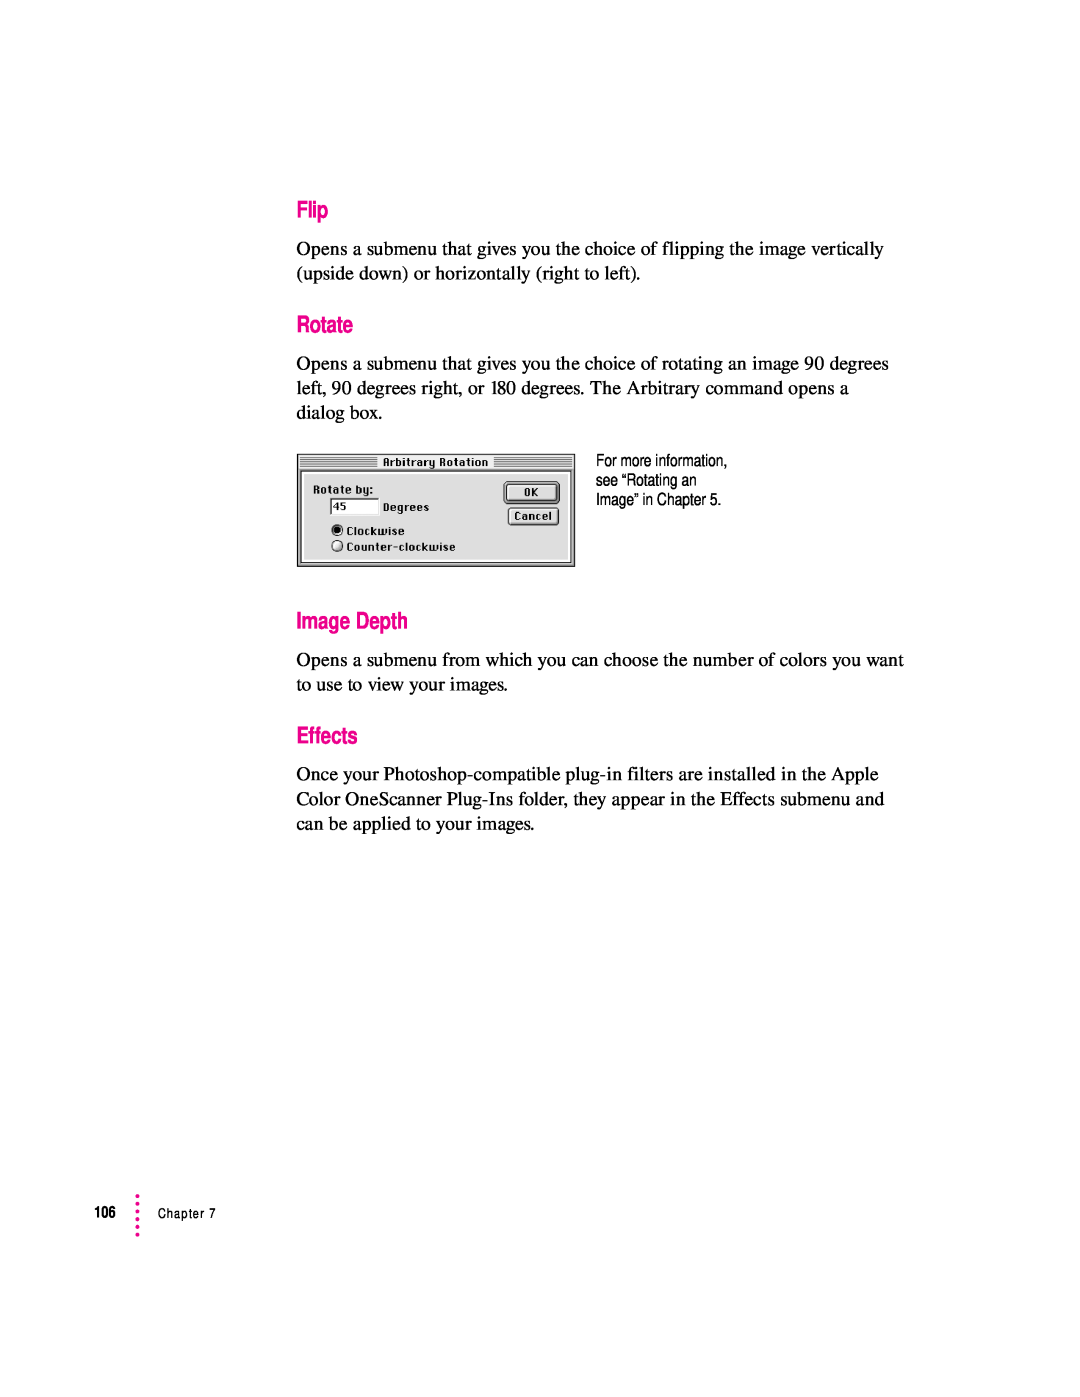 Apple 627, 1230 user manual Flip, Rotate, Image Depth, Effects, For more information, see “Rotating an Image” in Chapter 